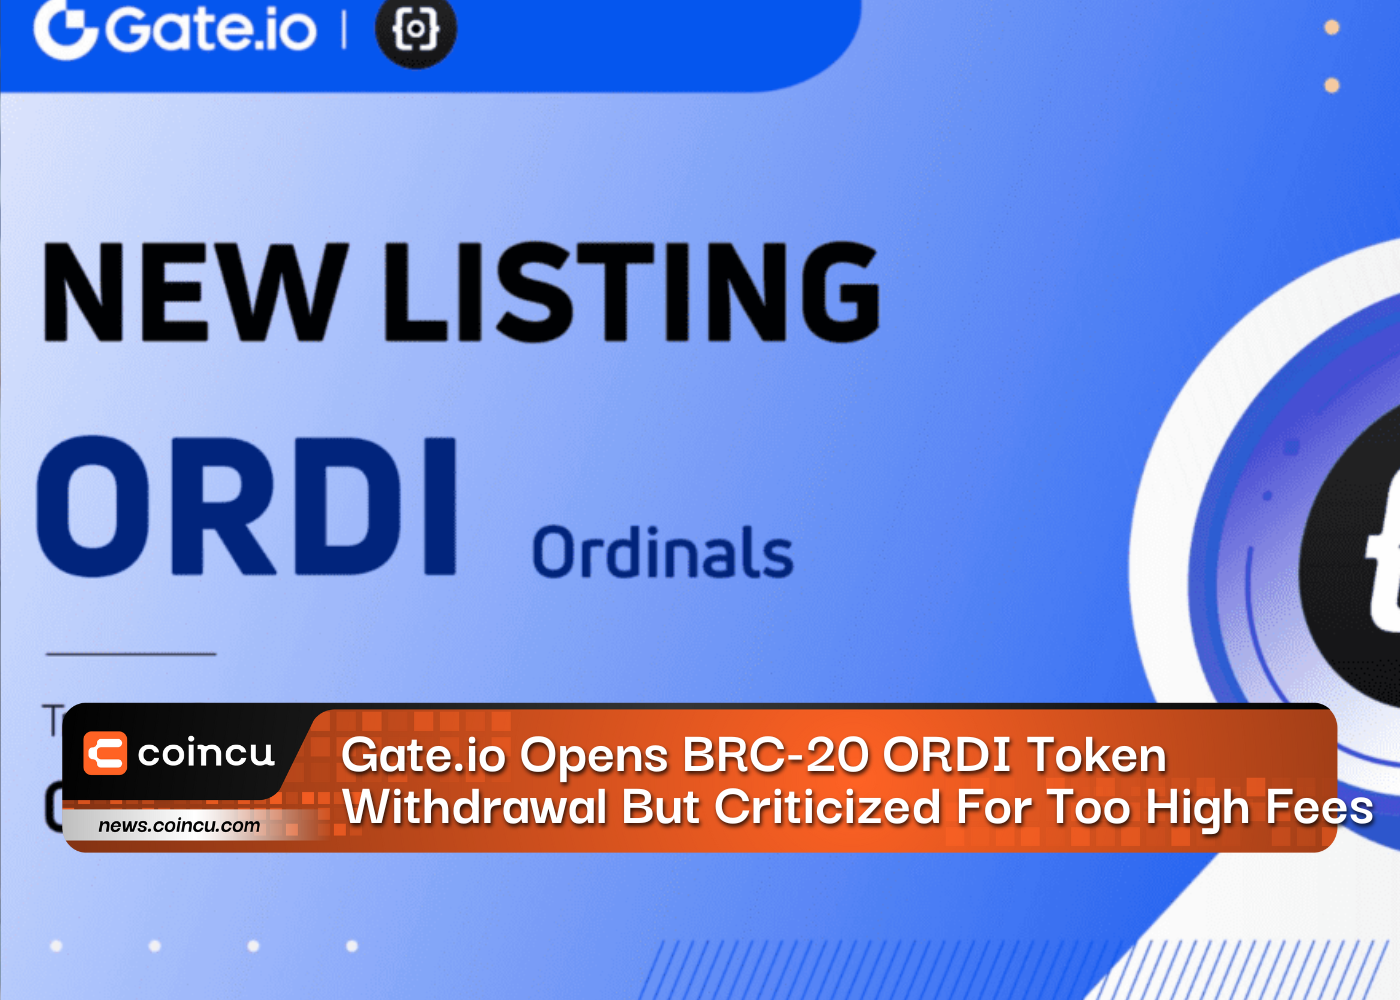 Gate.io Opens BRC-20 ORDI Token Withdrawal But Criticized For Too High Fees